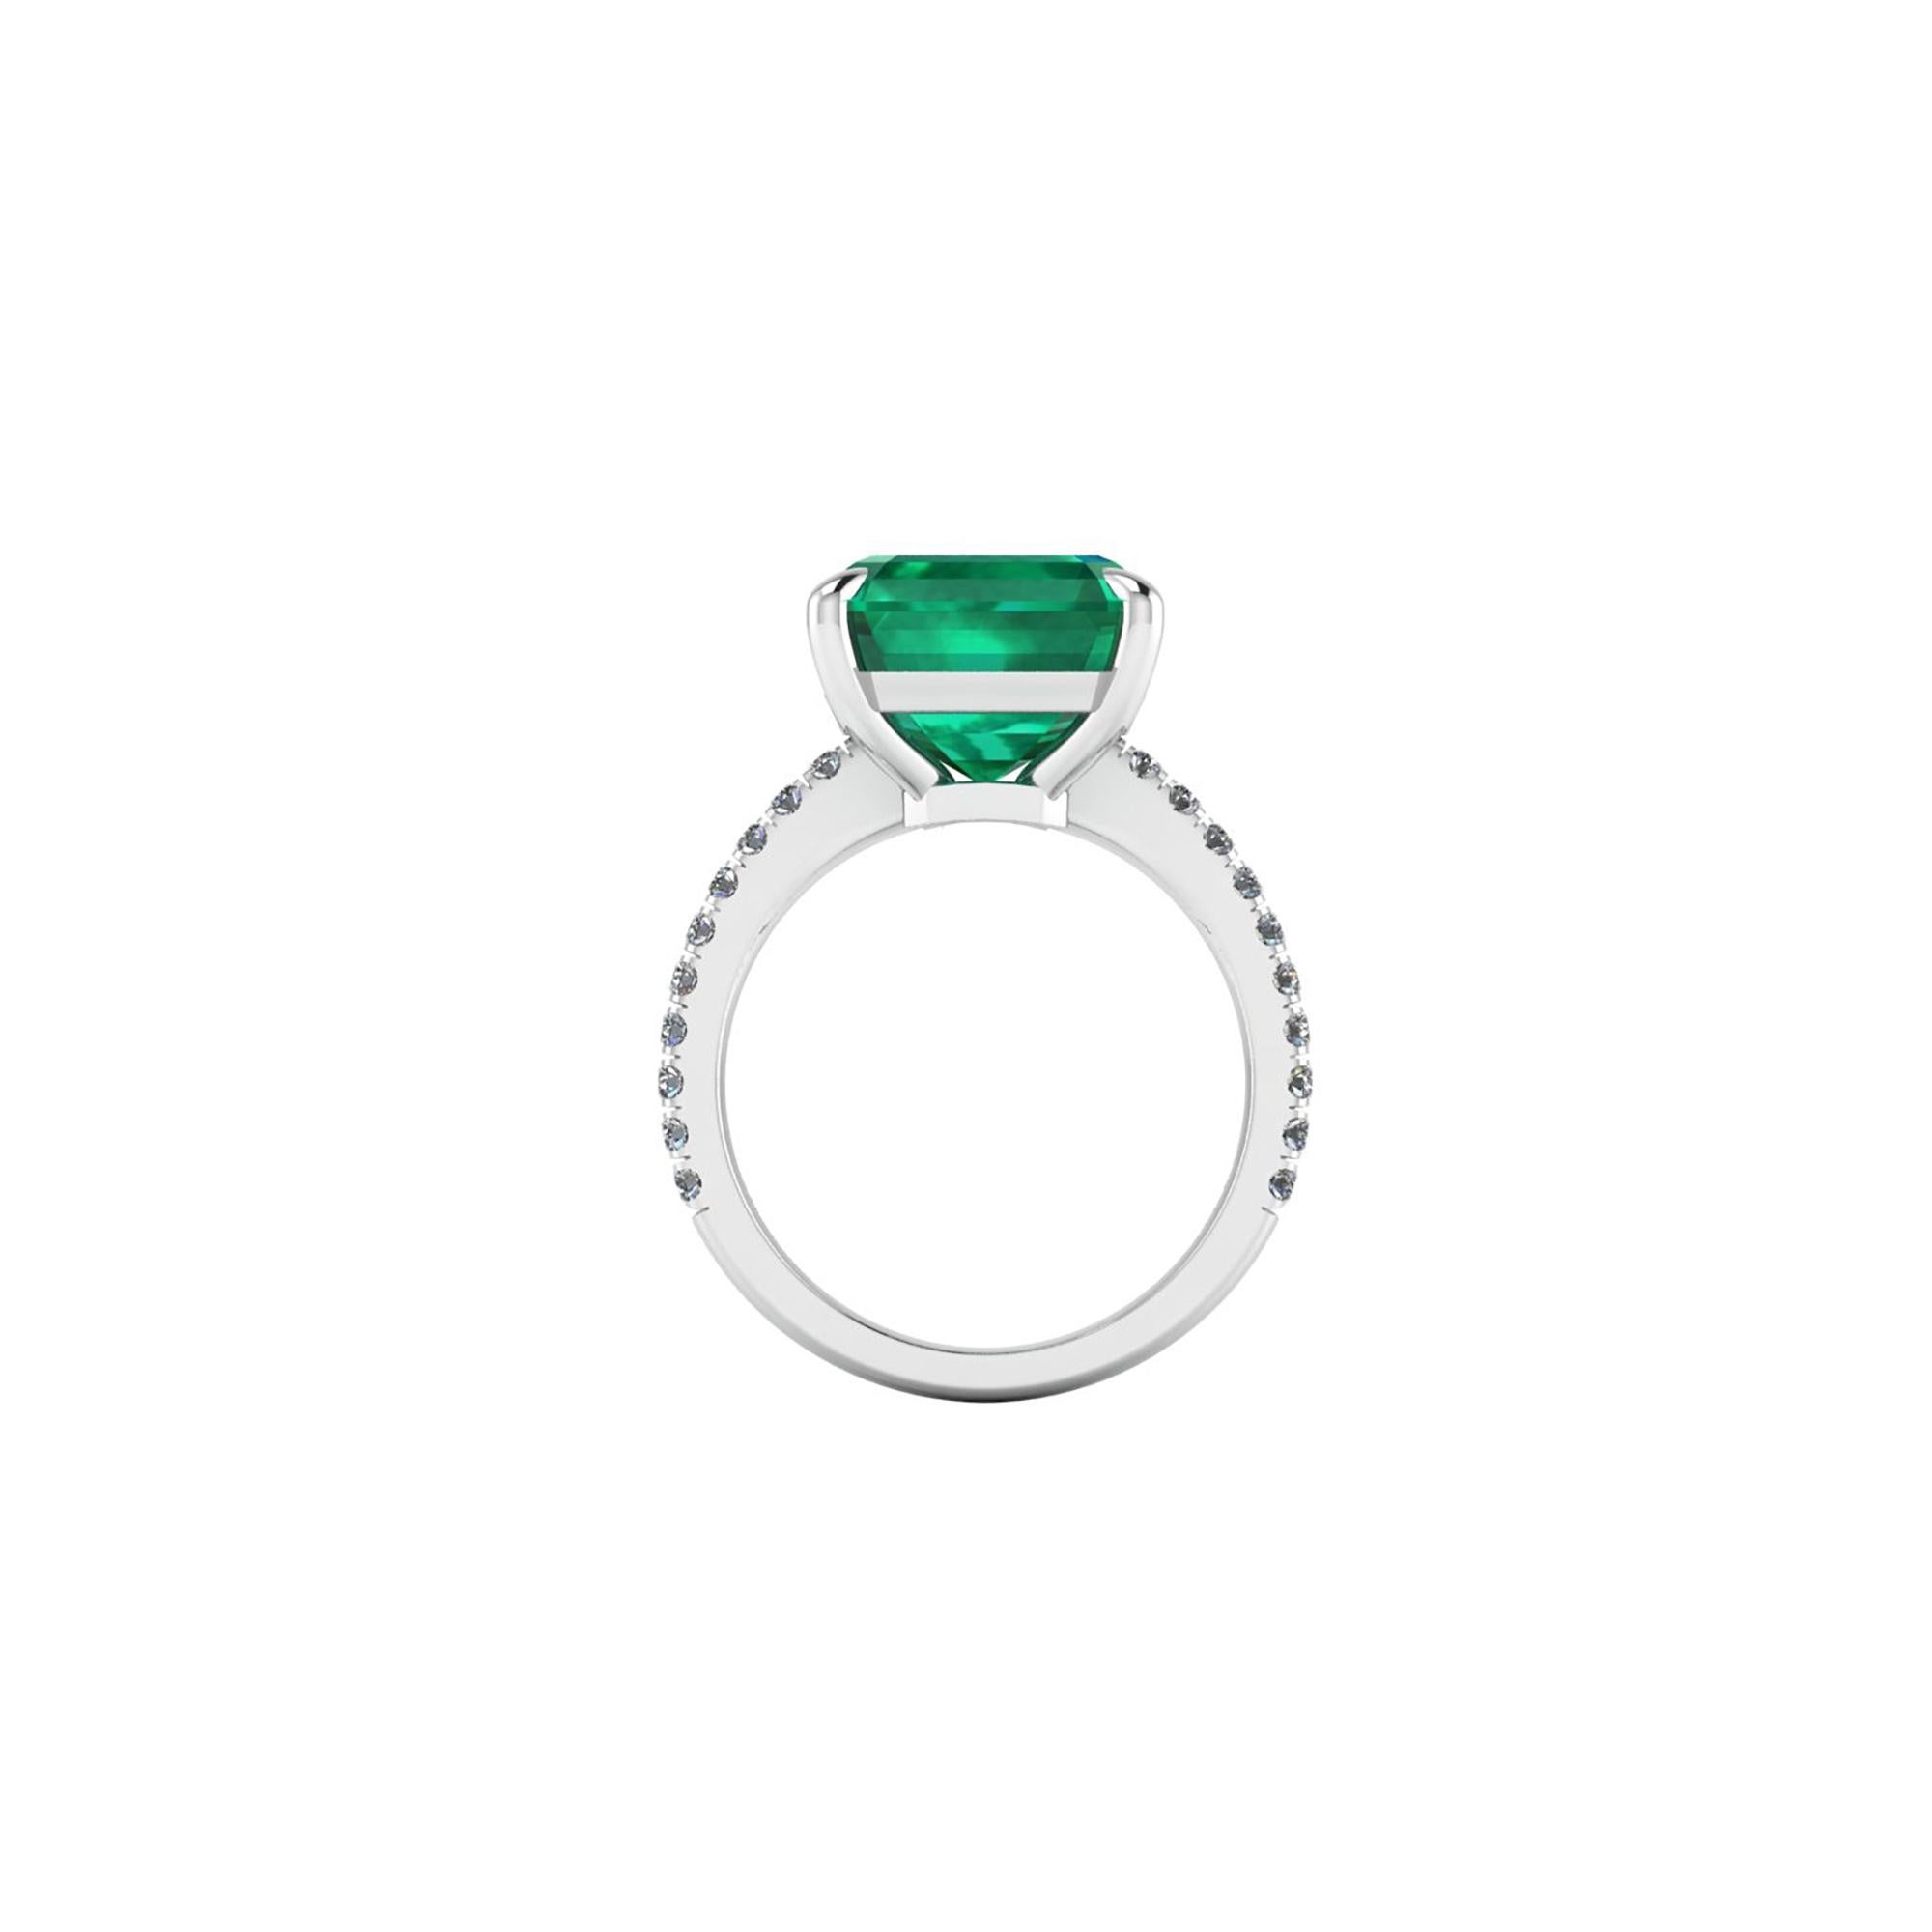 GRS Certified 6.95 carat Colombian emerald cut Emerald, very high quality color,  embellished by a pave' of bright diamonds of approximately  total carat weight of 0.32 carat, set in a hand crafted Platinum 950 ring, manufactured with the best